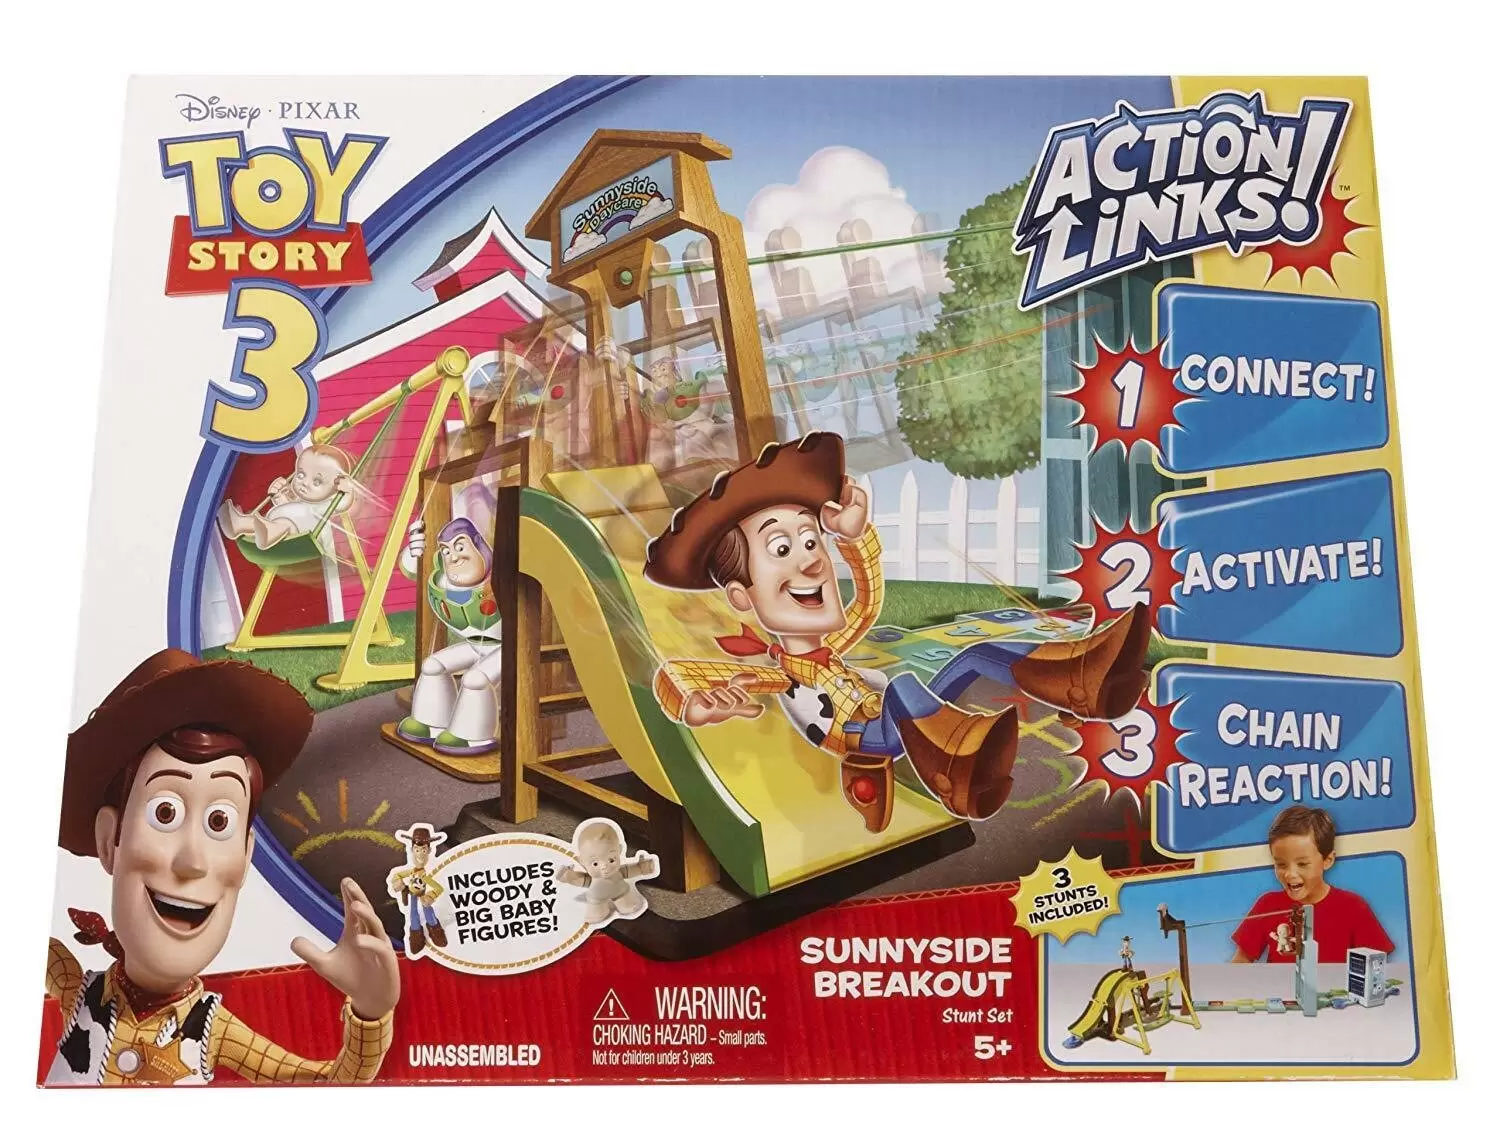 Toy Story Action Links - Sunnyside Breakout